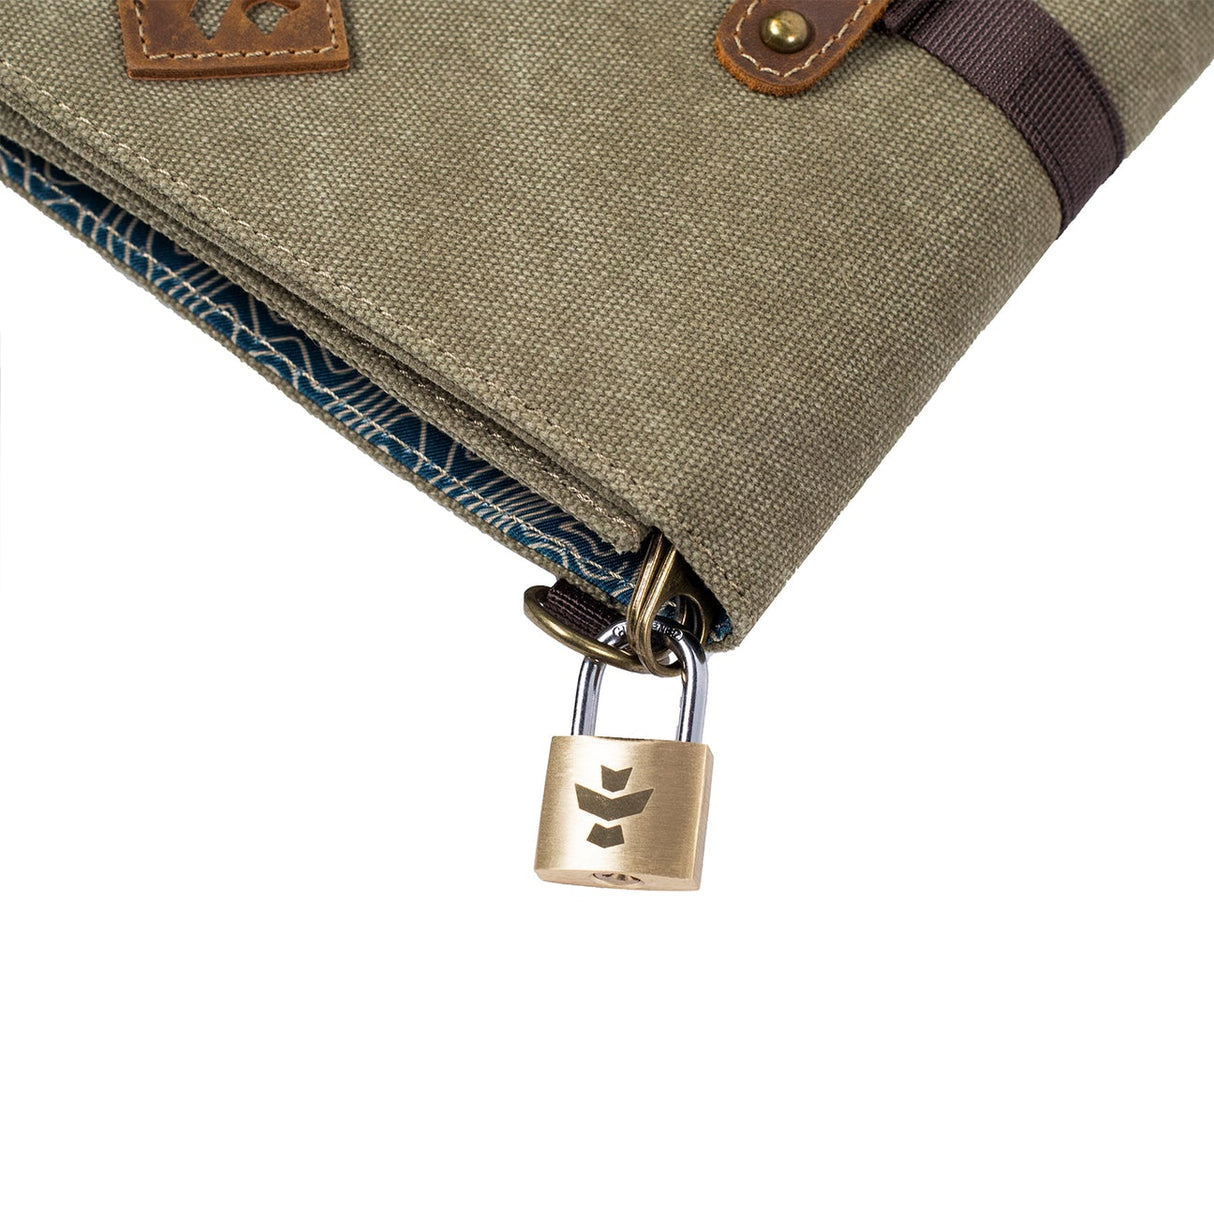 Revelry Supply's The Rolling Kit - Close-up of Smell Proof Lock on Textured Fabric